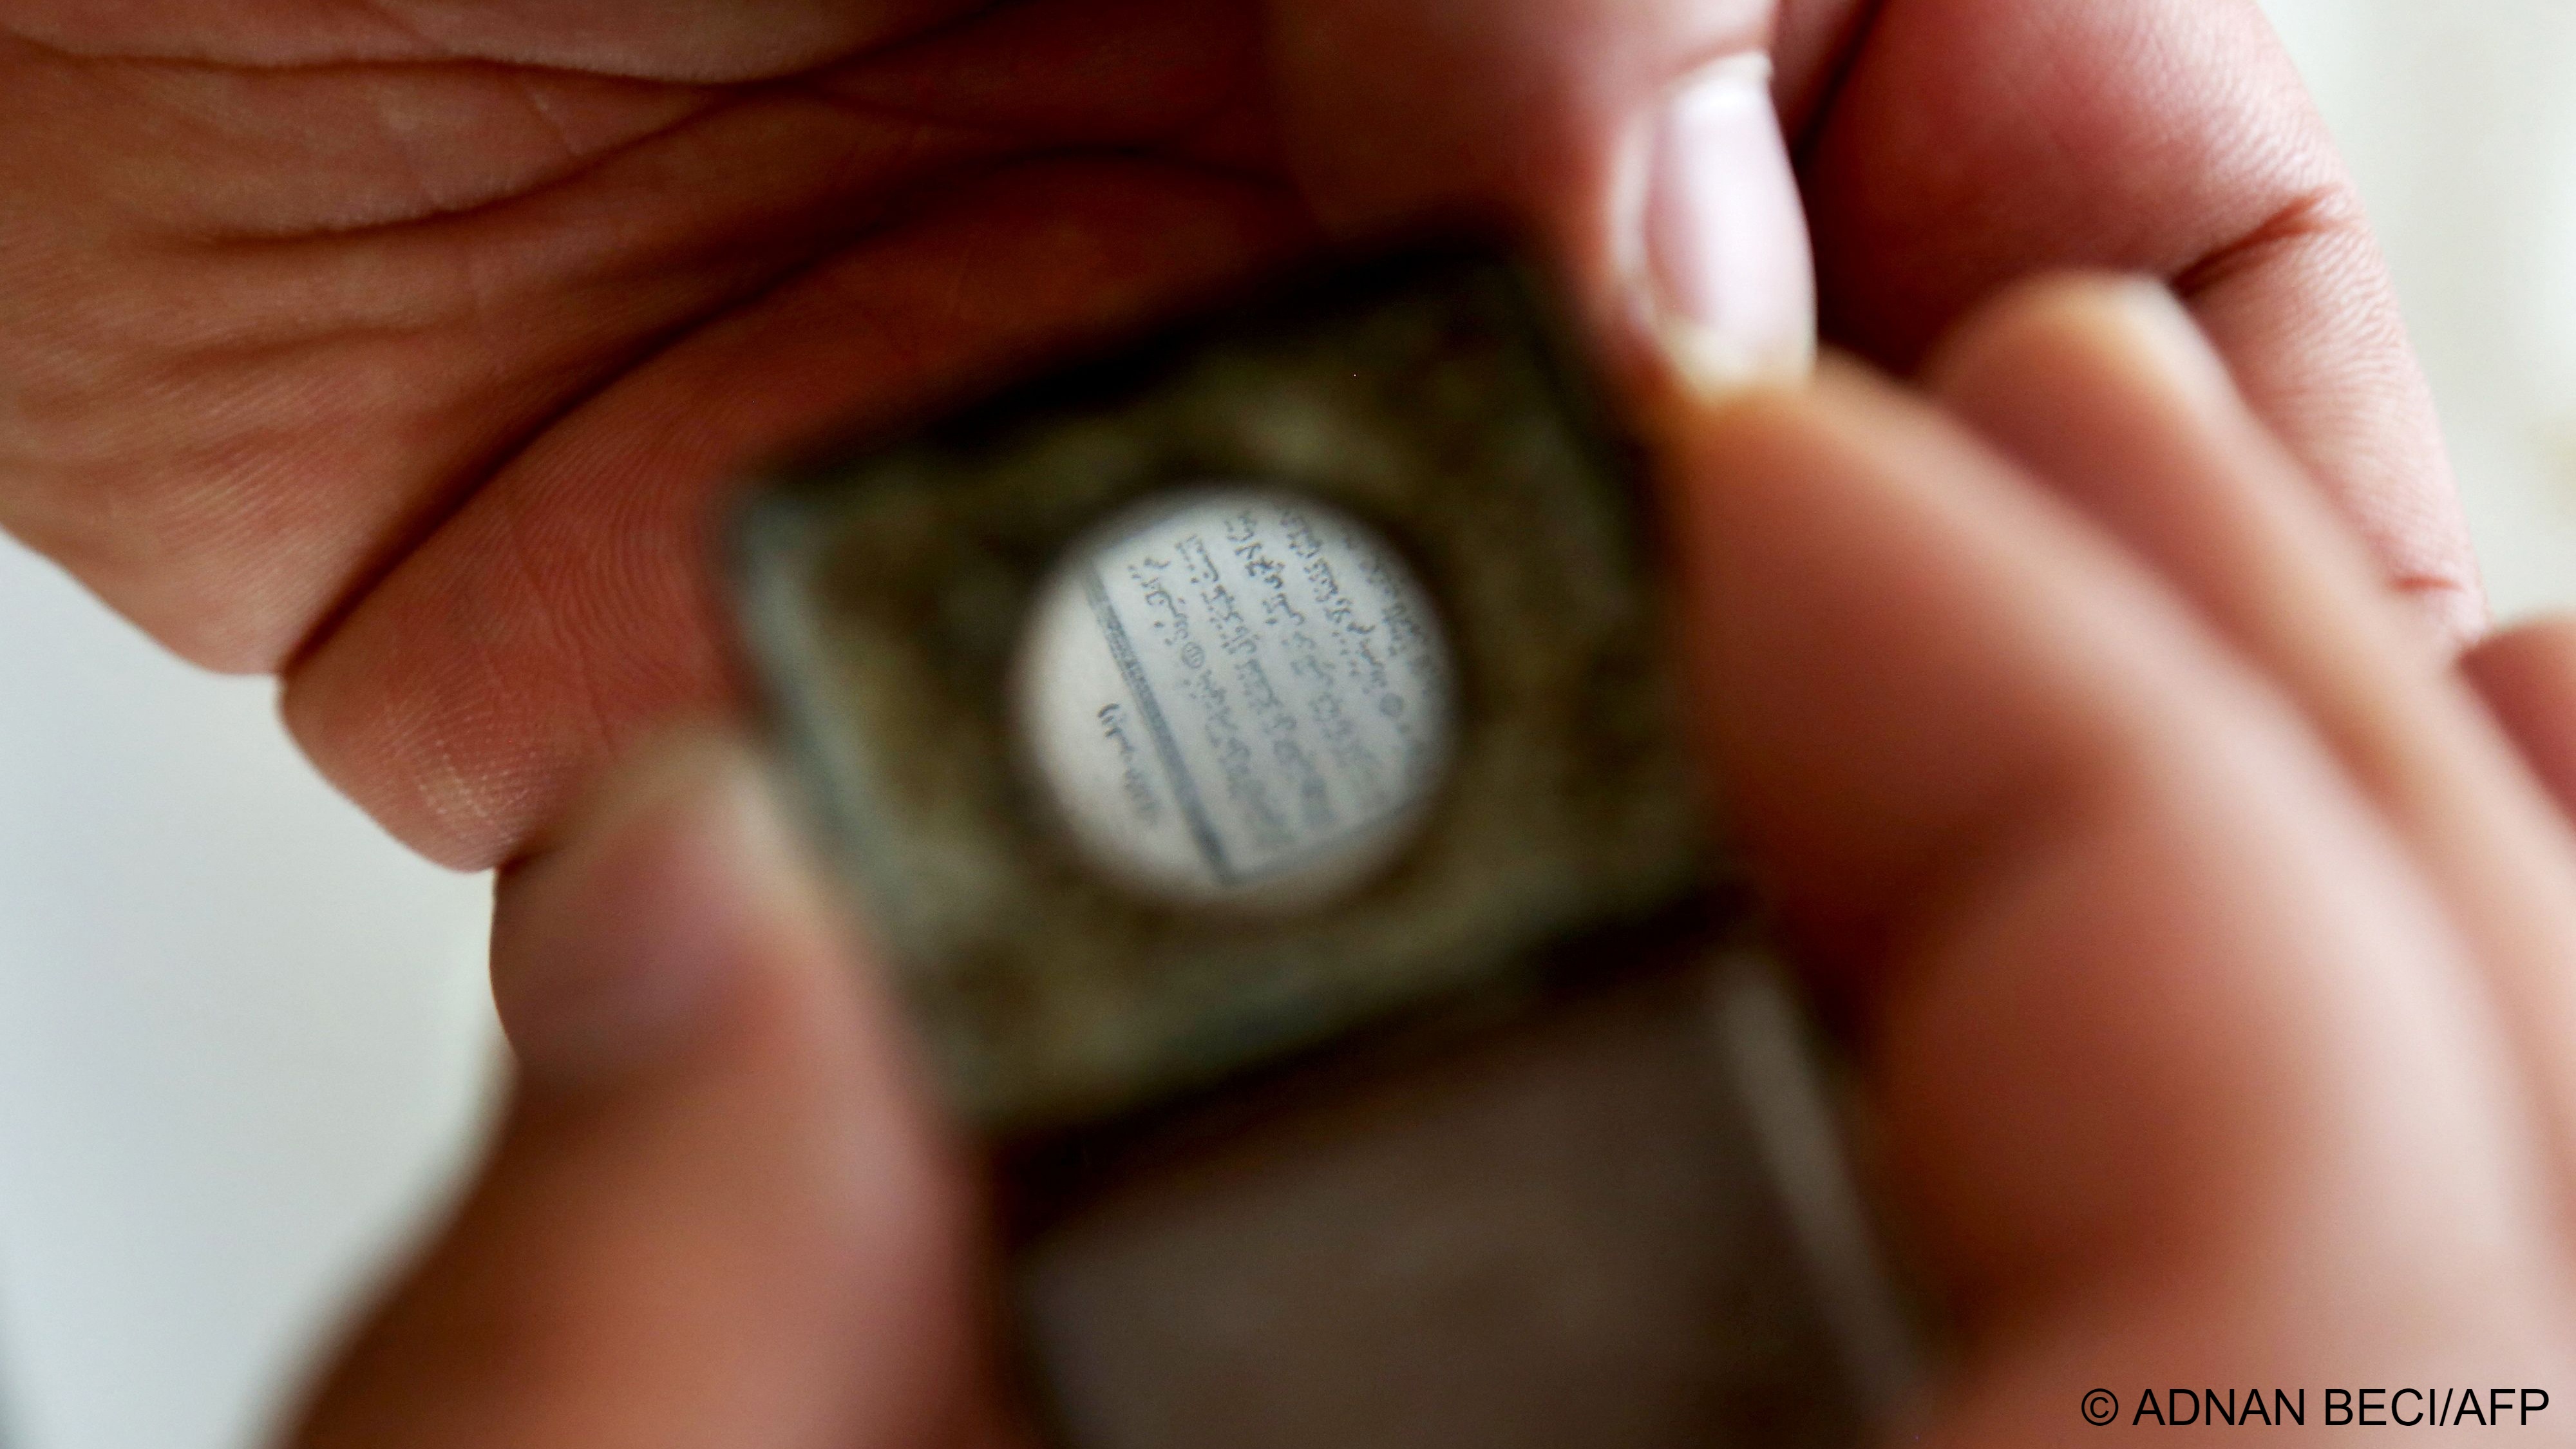  The Arabic text can only be read with a small magnifying glass embedded in the Koran's case (image: Adnan Beci/AFP) 